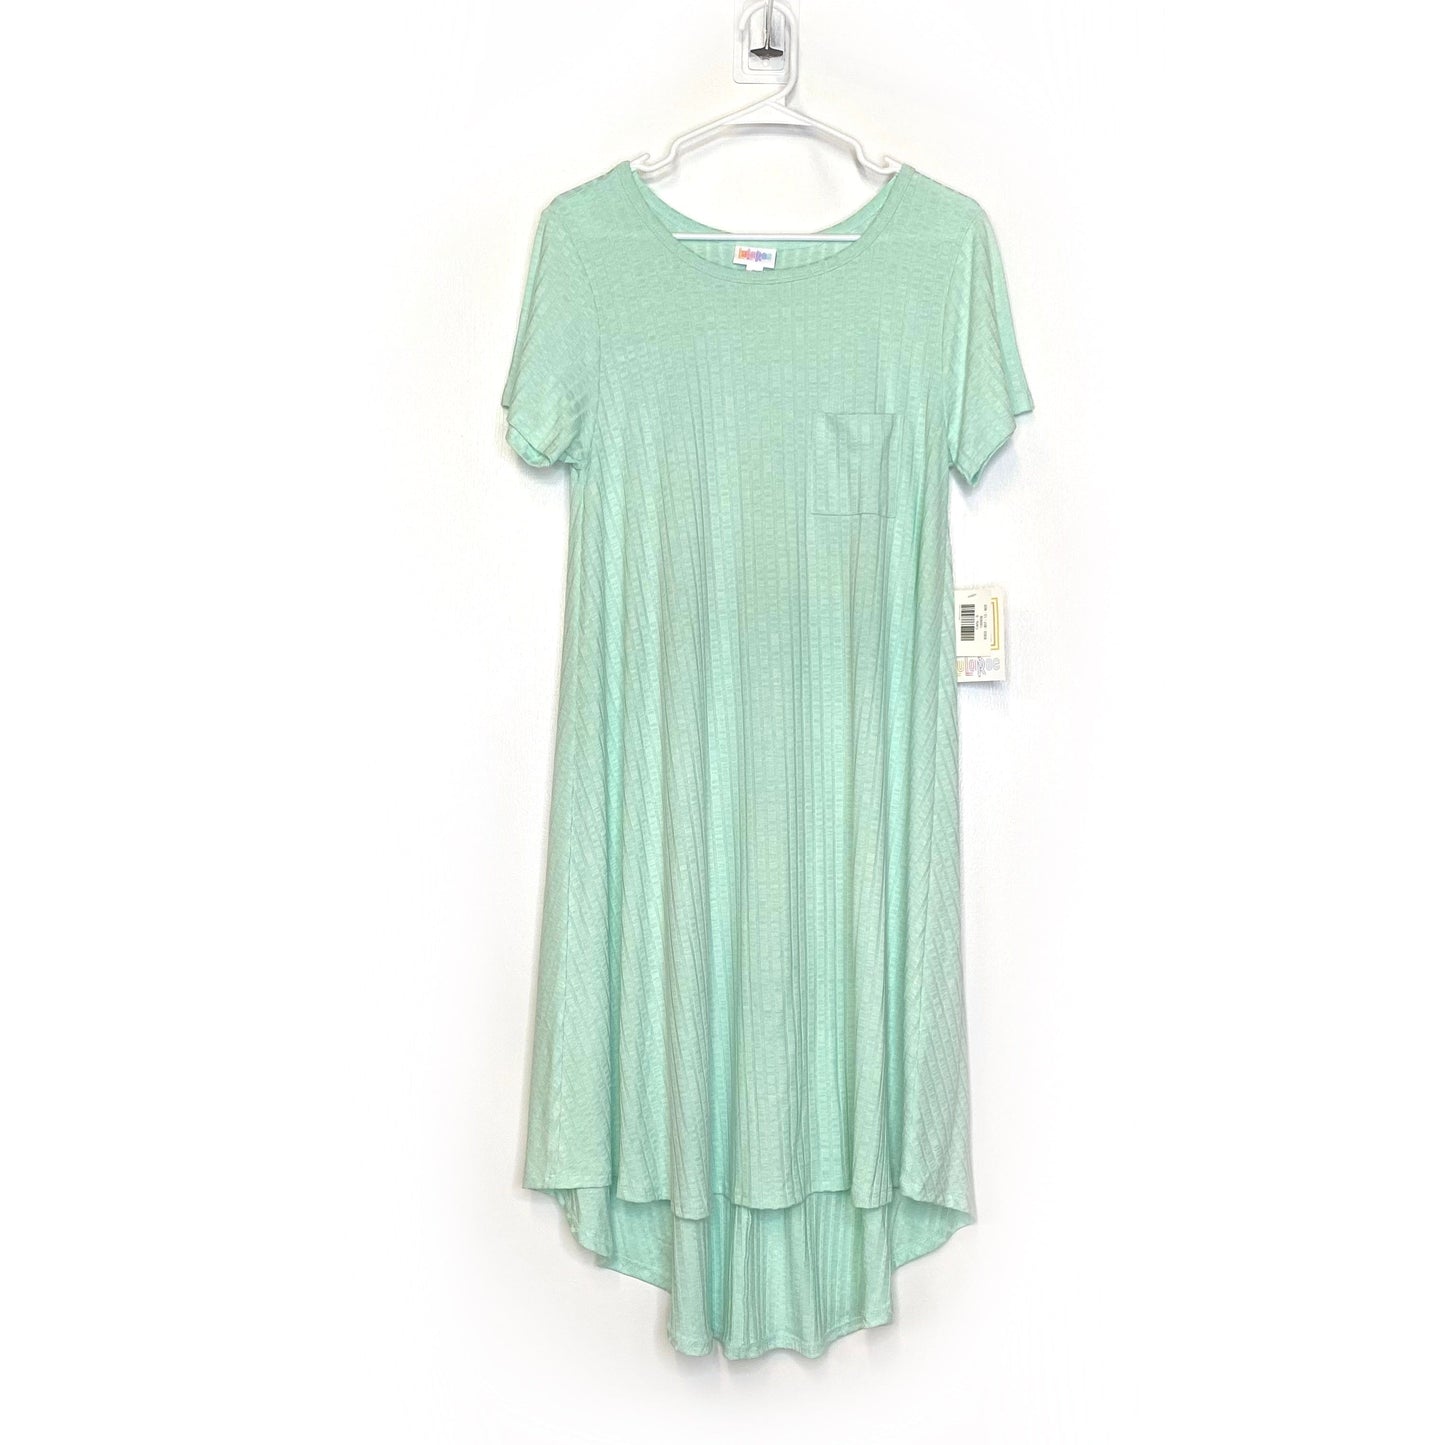 LuLaRoe Womens S Heather Pale Green Vertical Ribbed 'Carly' S/s Swing Dress NWT